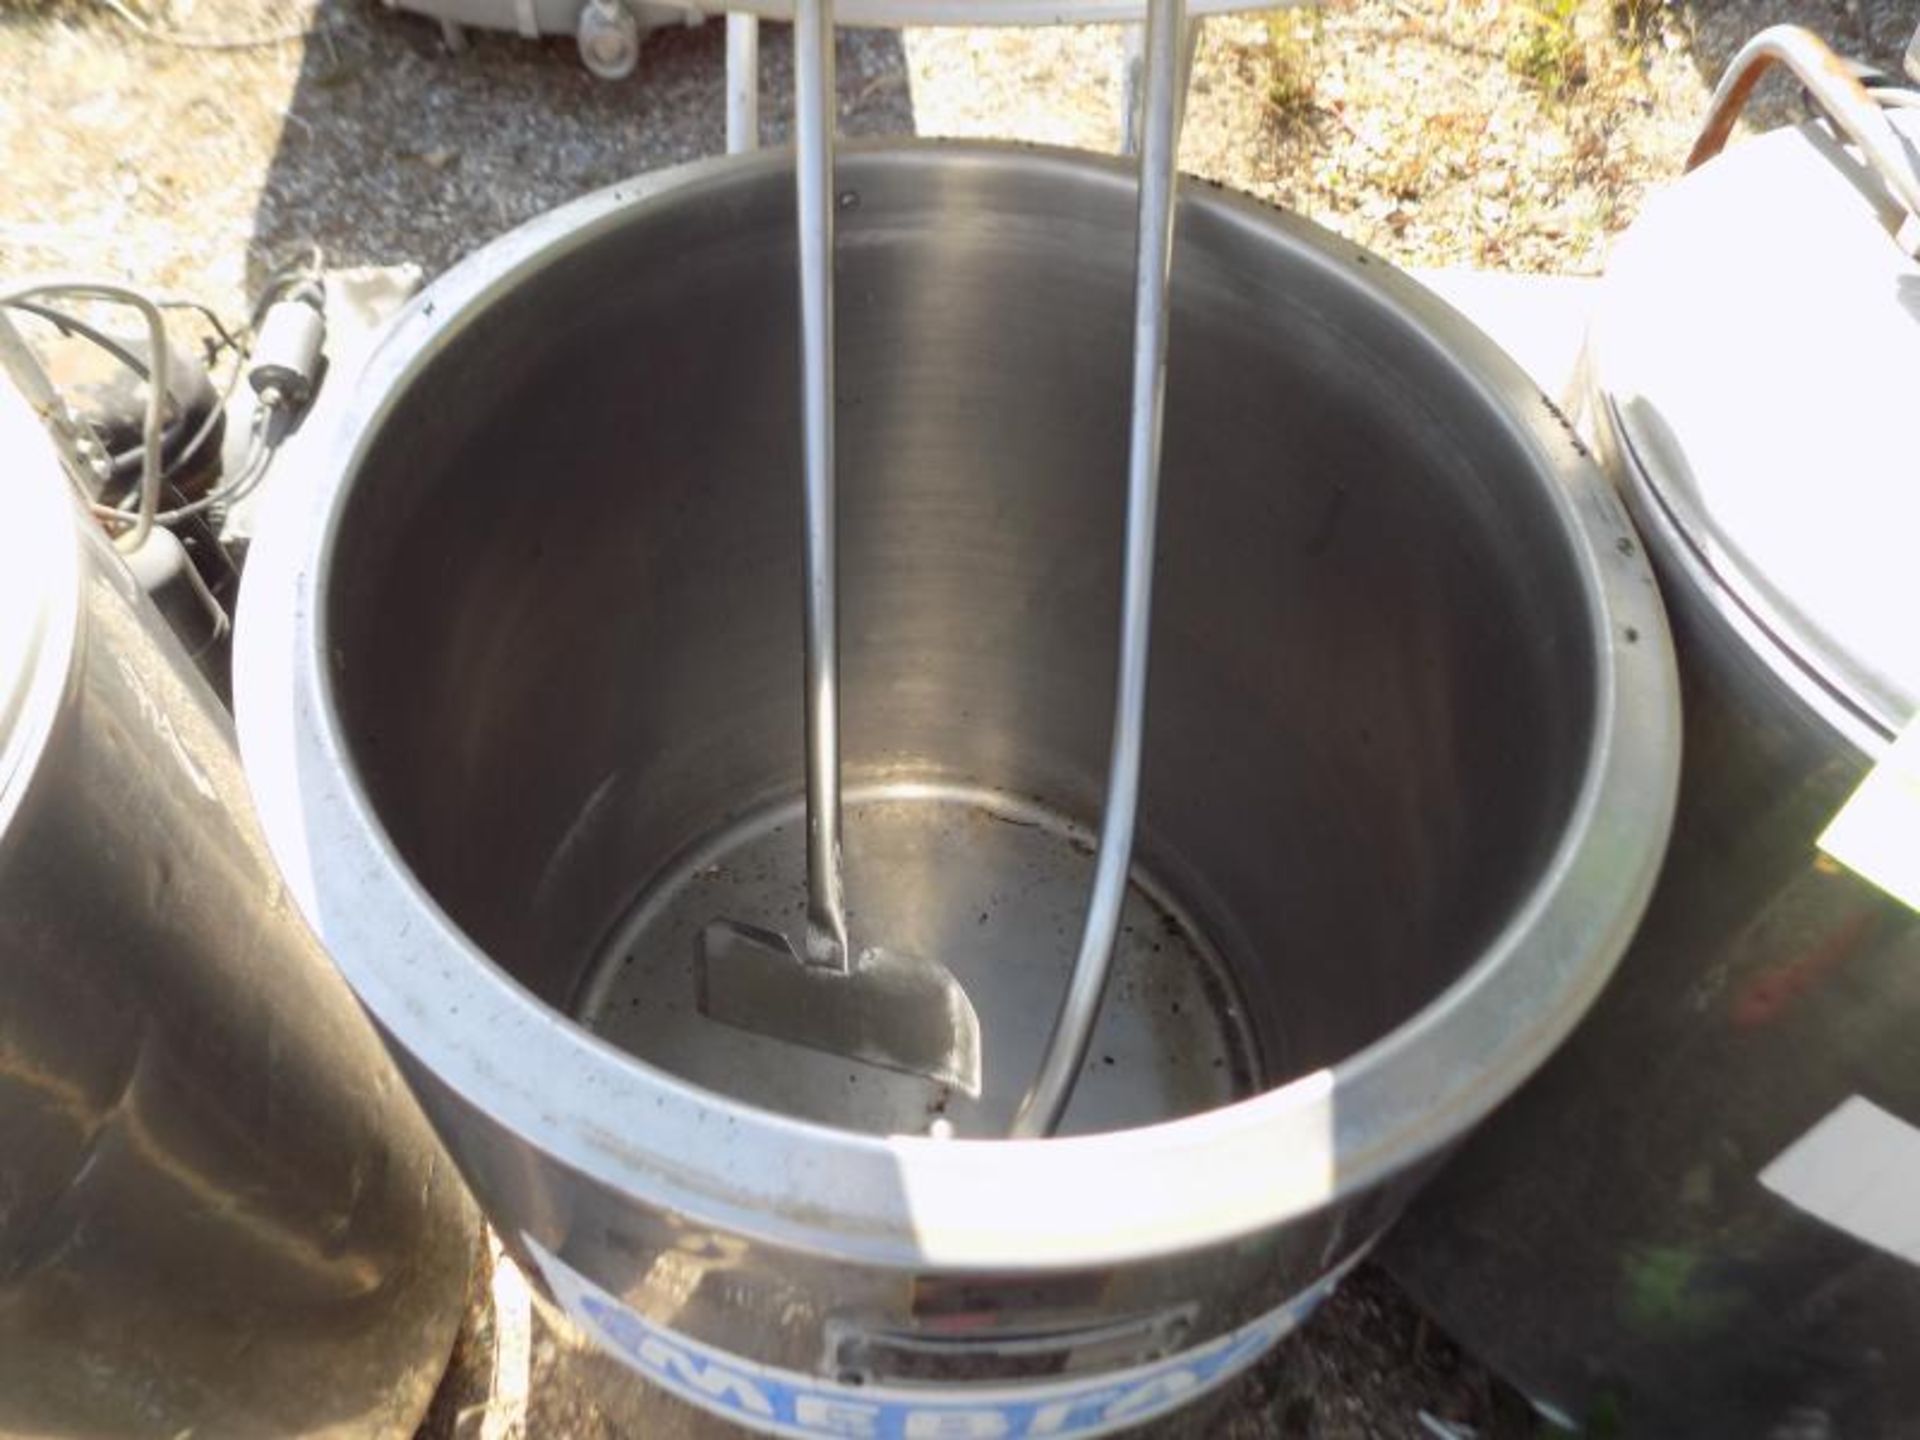 Japy Aprox. 320 L/85 Gal. Jacketed S/S Farm Tank with Hinged Lid, Twin Blade Prop, Motor with - Image 2 of 4